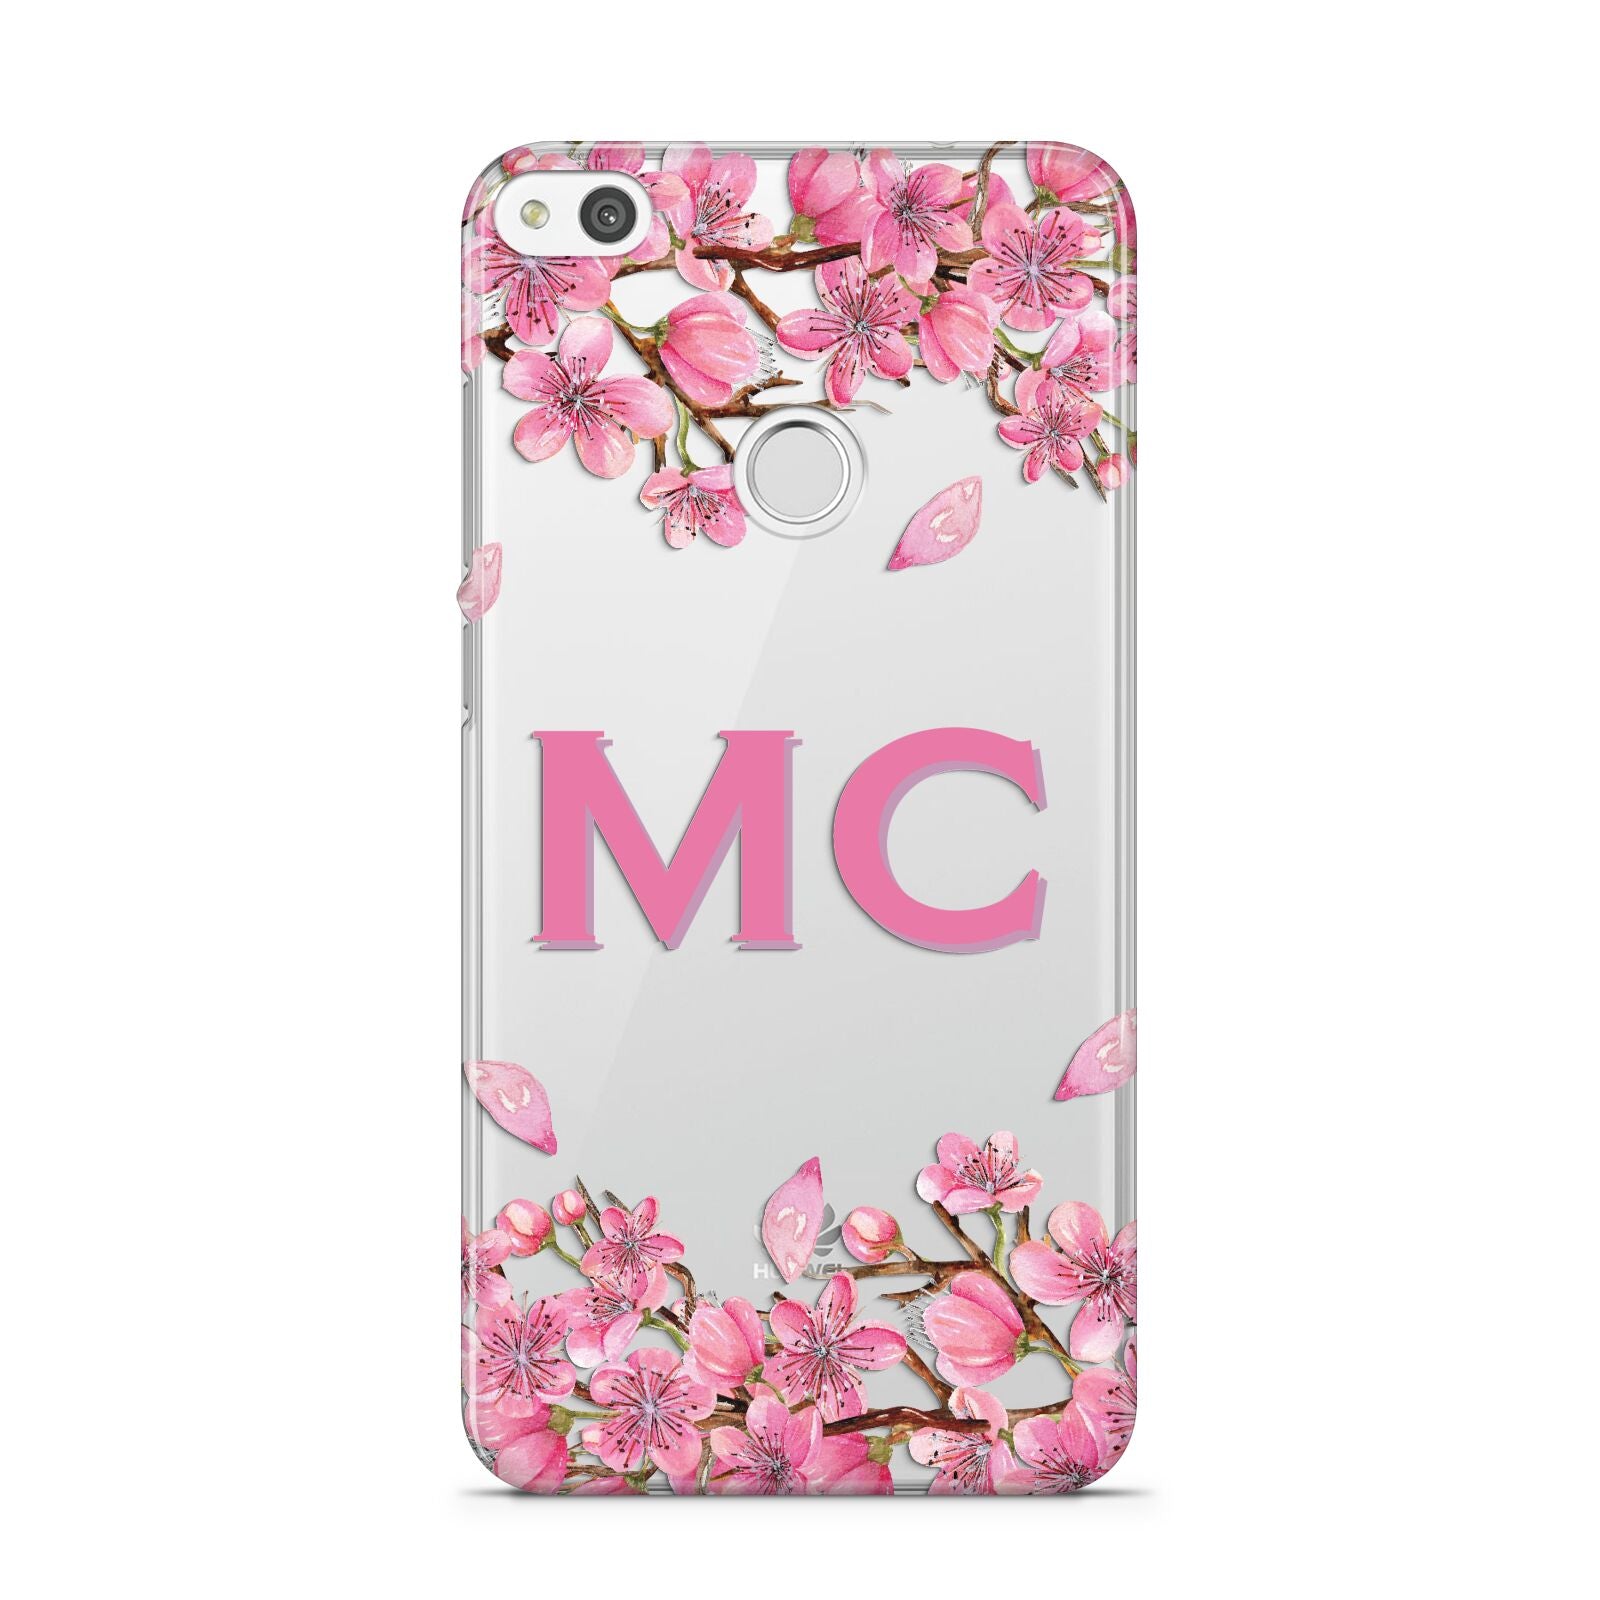 Personalised Vibrant Cherry Blossom Pink Huawei P8 Lite Case